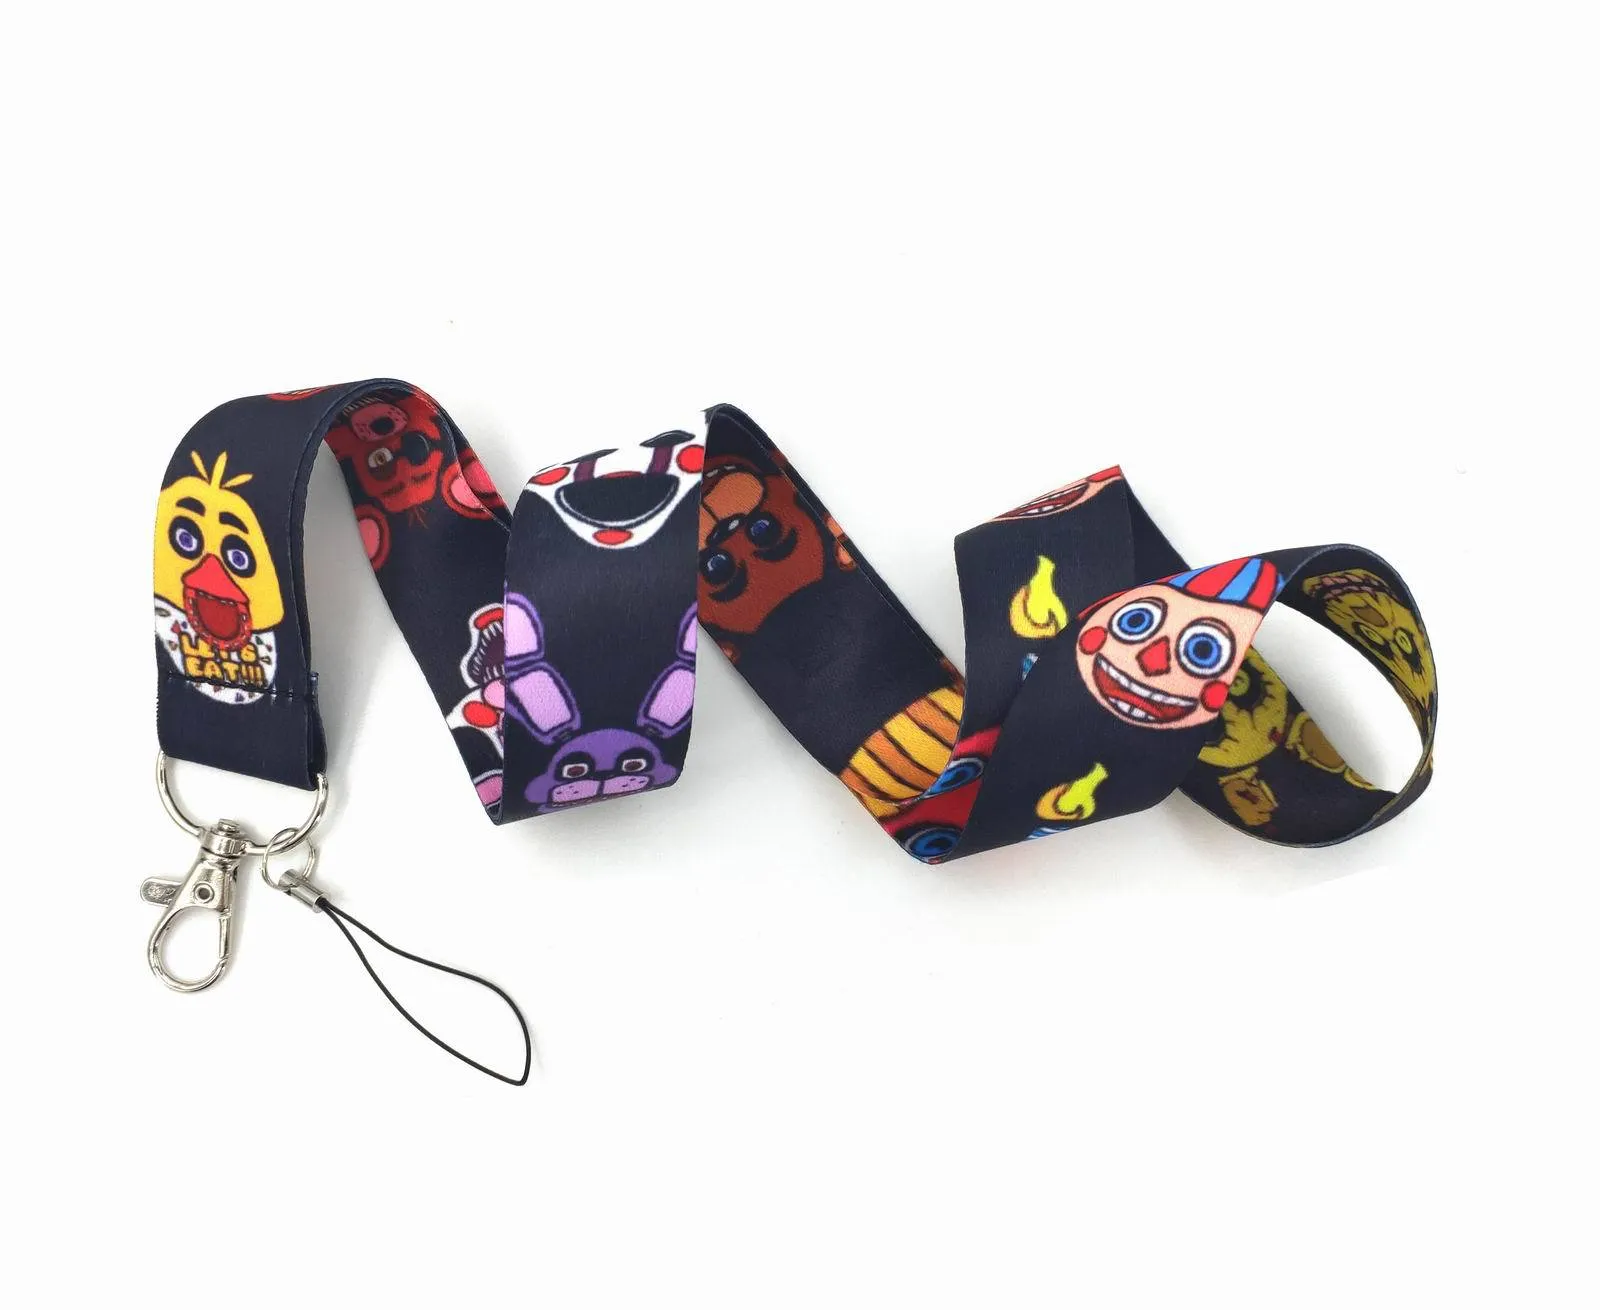 Horror Game Anime Lanyard Strap Keychain ID Card Passport Gym Cell Phone USB Badge Key Ring Holder Neck Straps Accessories